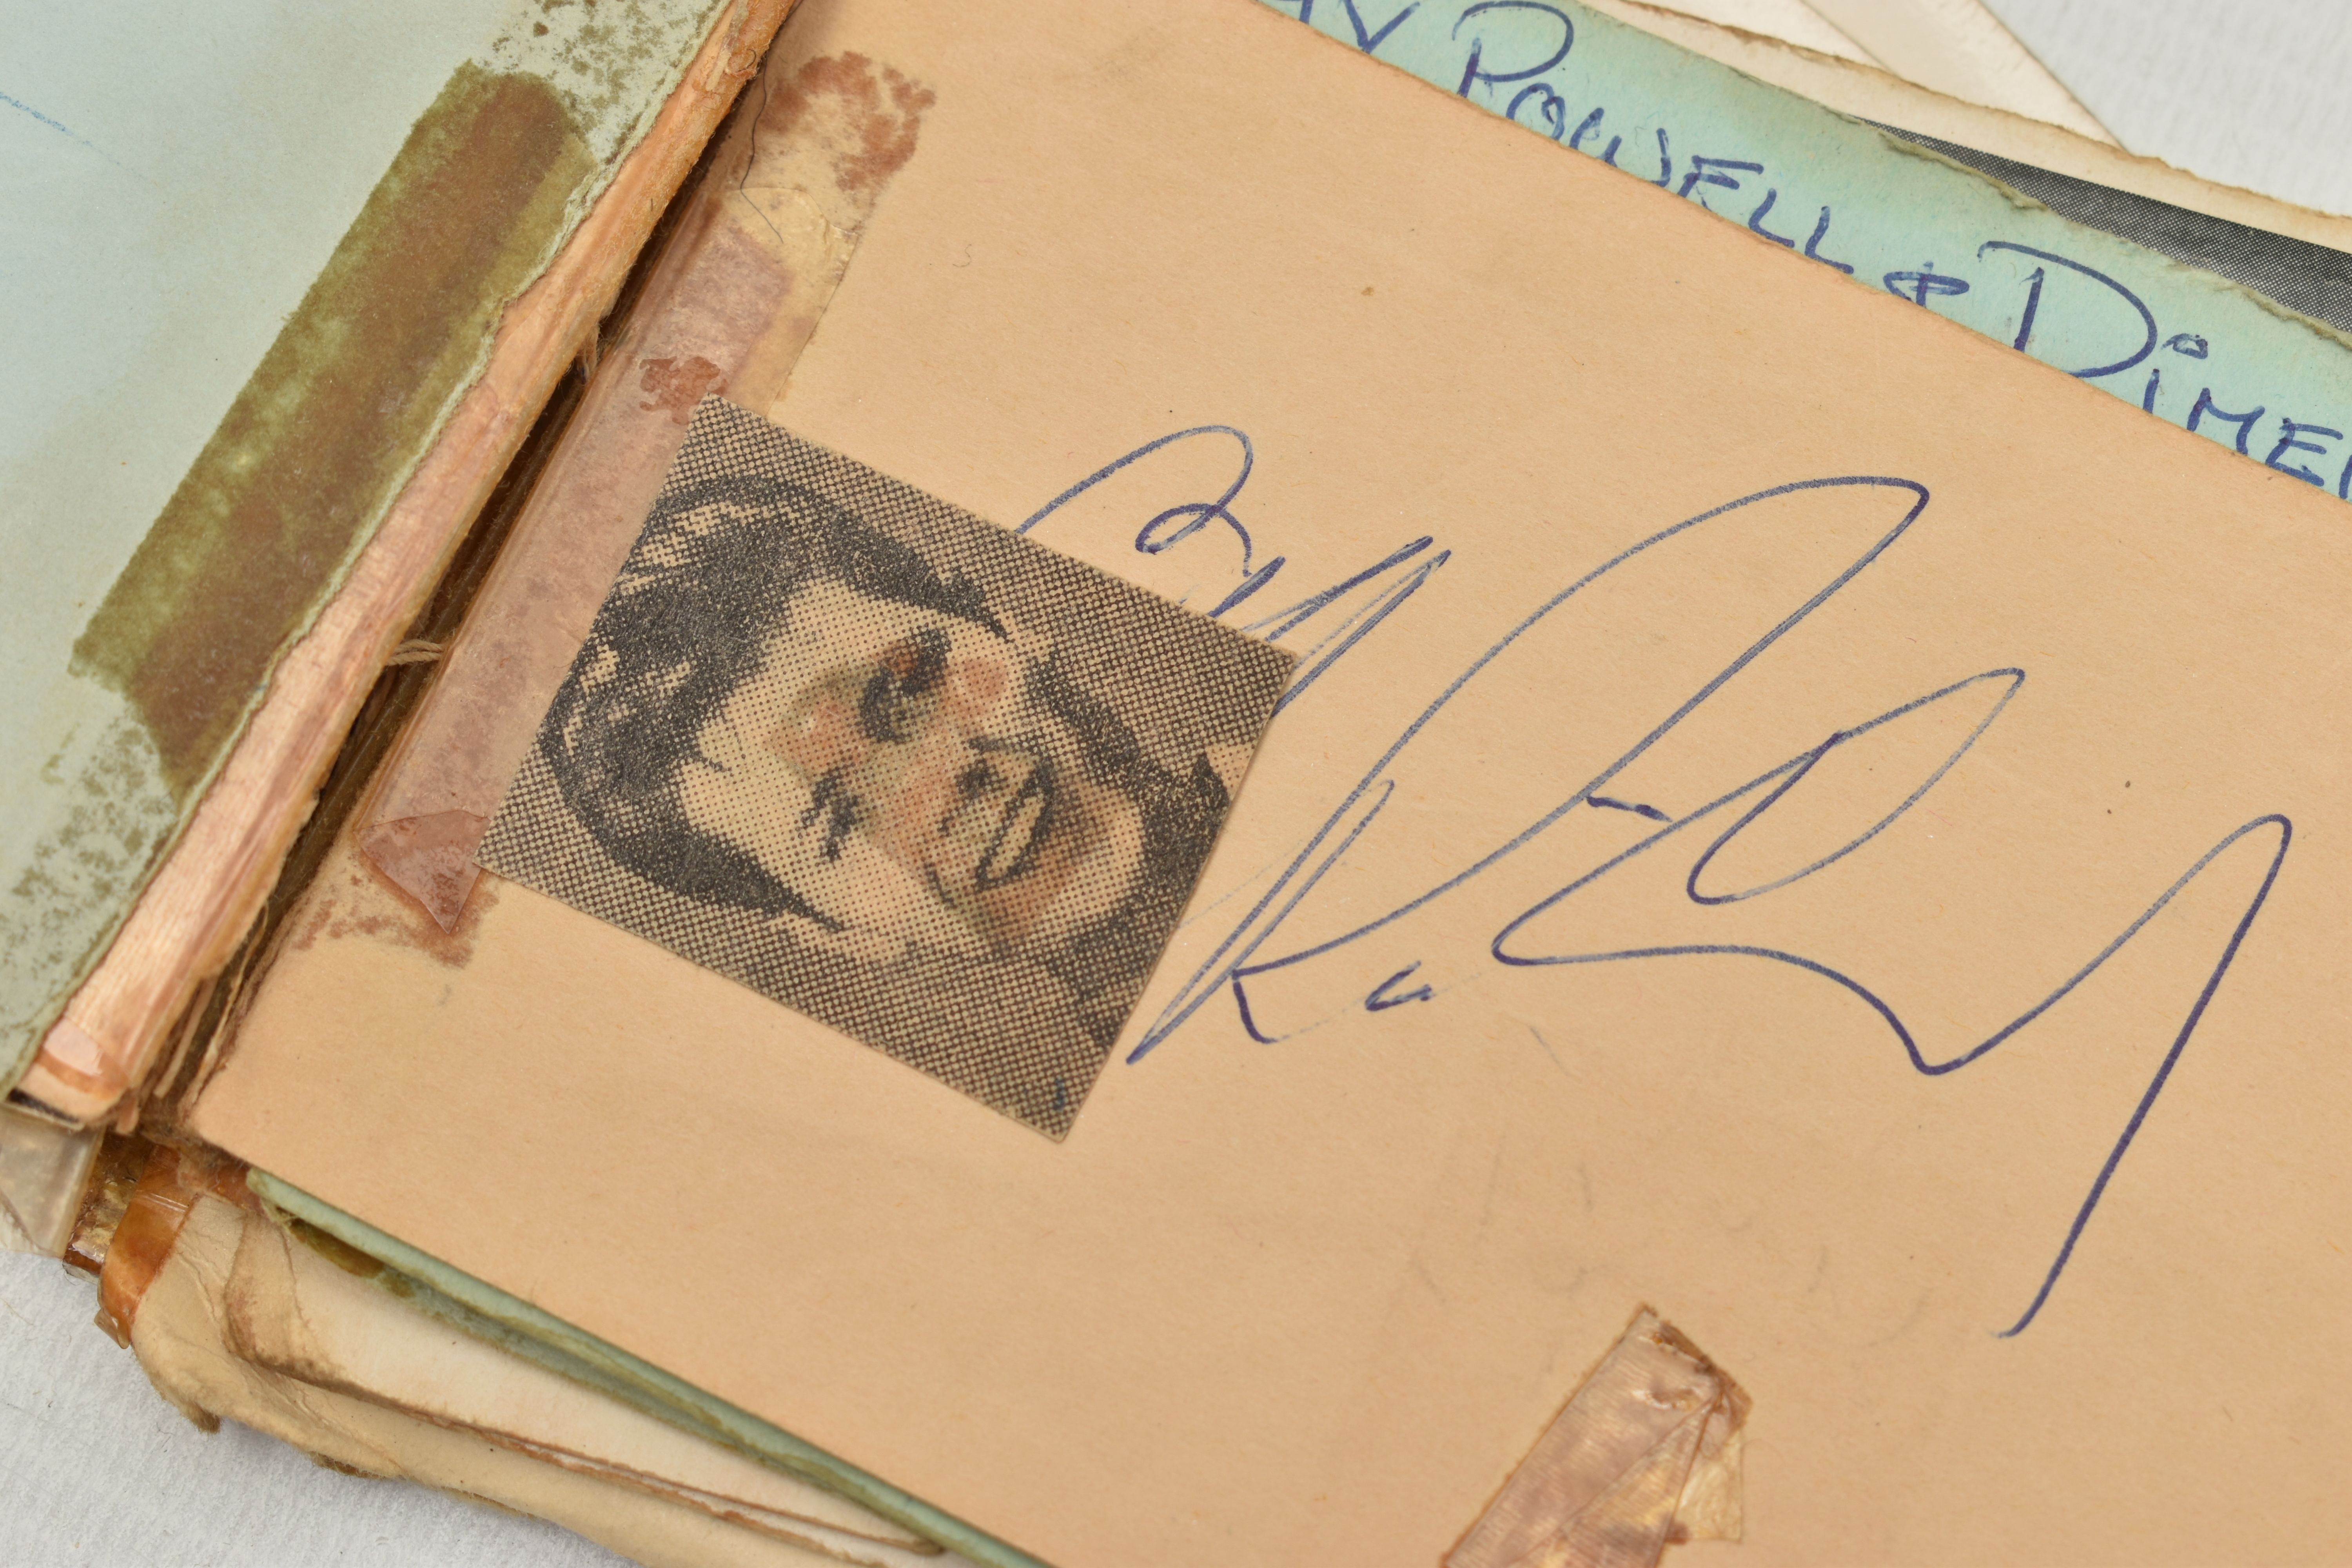 THE BEATLES AUTOGRAPHS, two autograph albums and two photographs, the Woburn Abbey autograph book is - Image 21 of 22